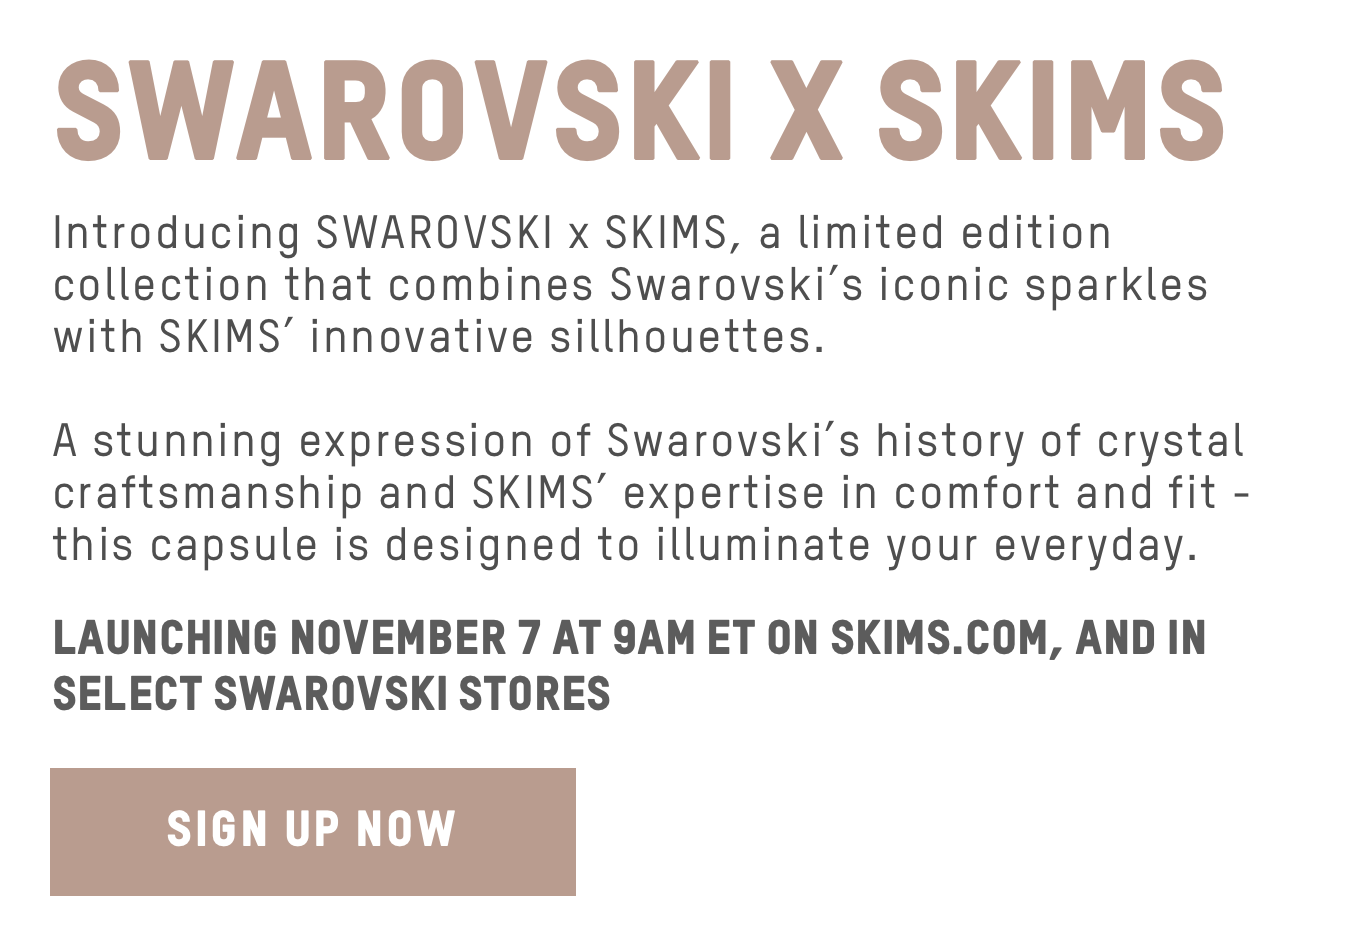 Let yourself shine in the new SWAROVSKI X SKIMS collection